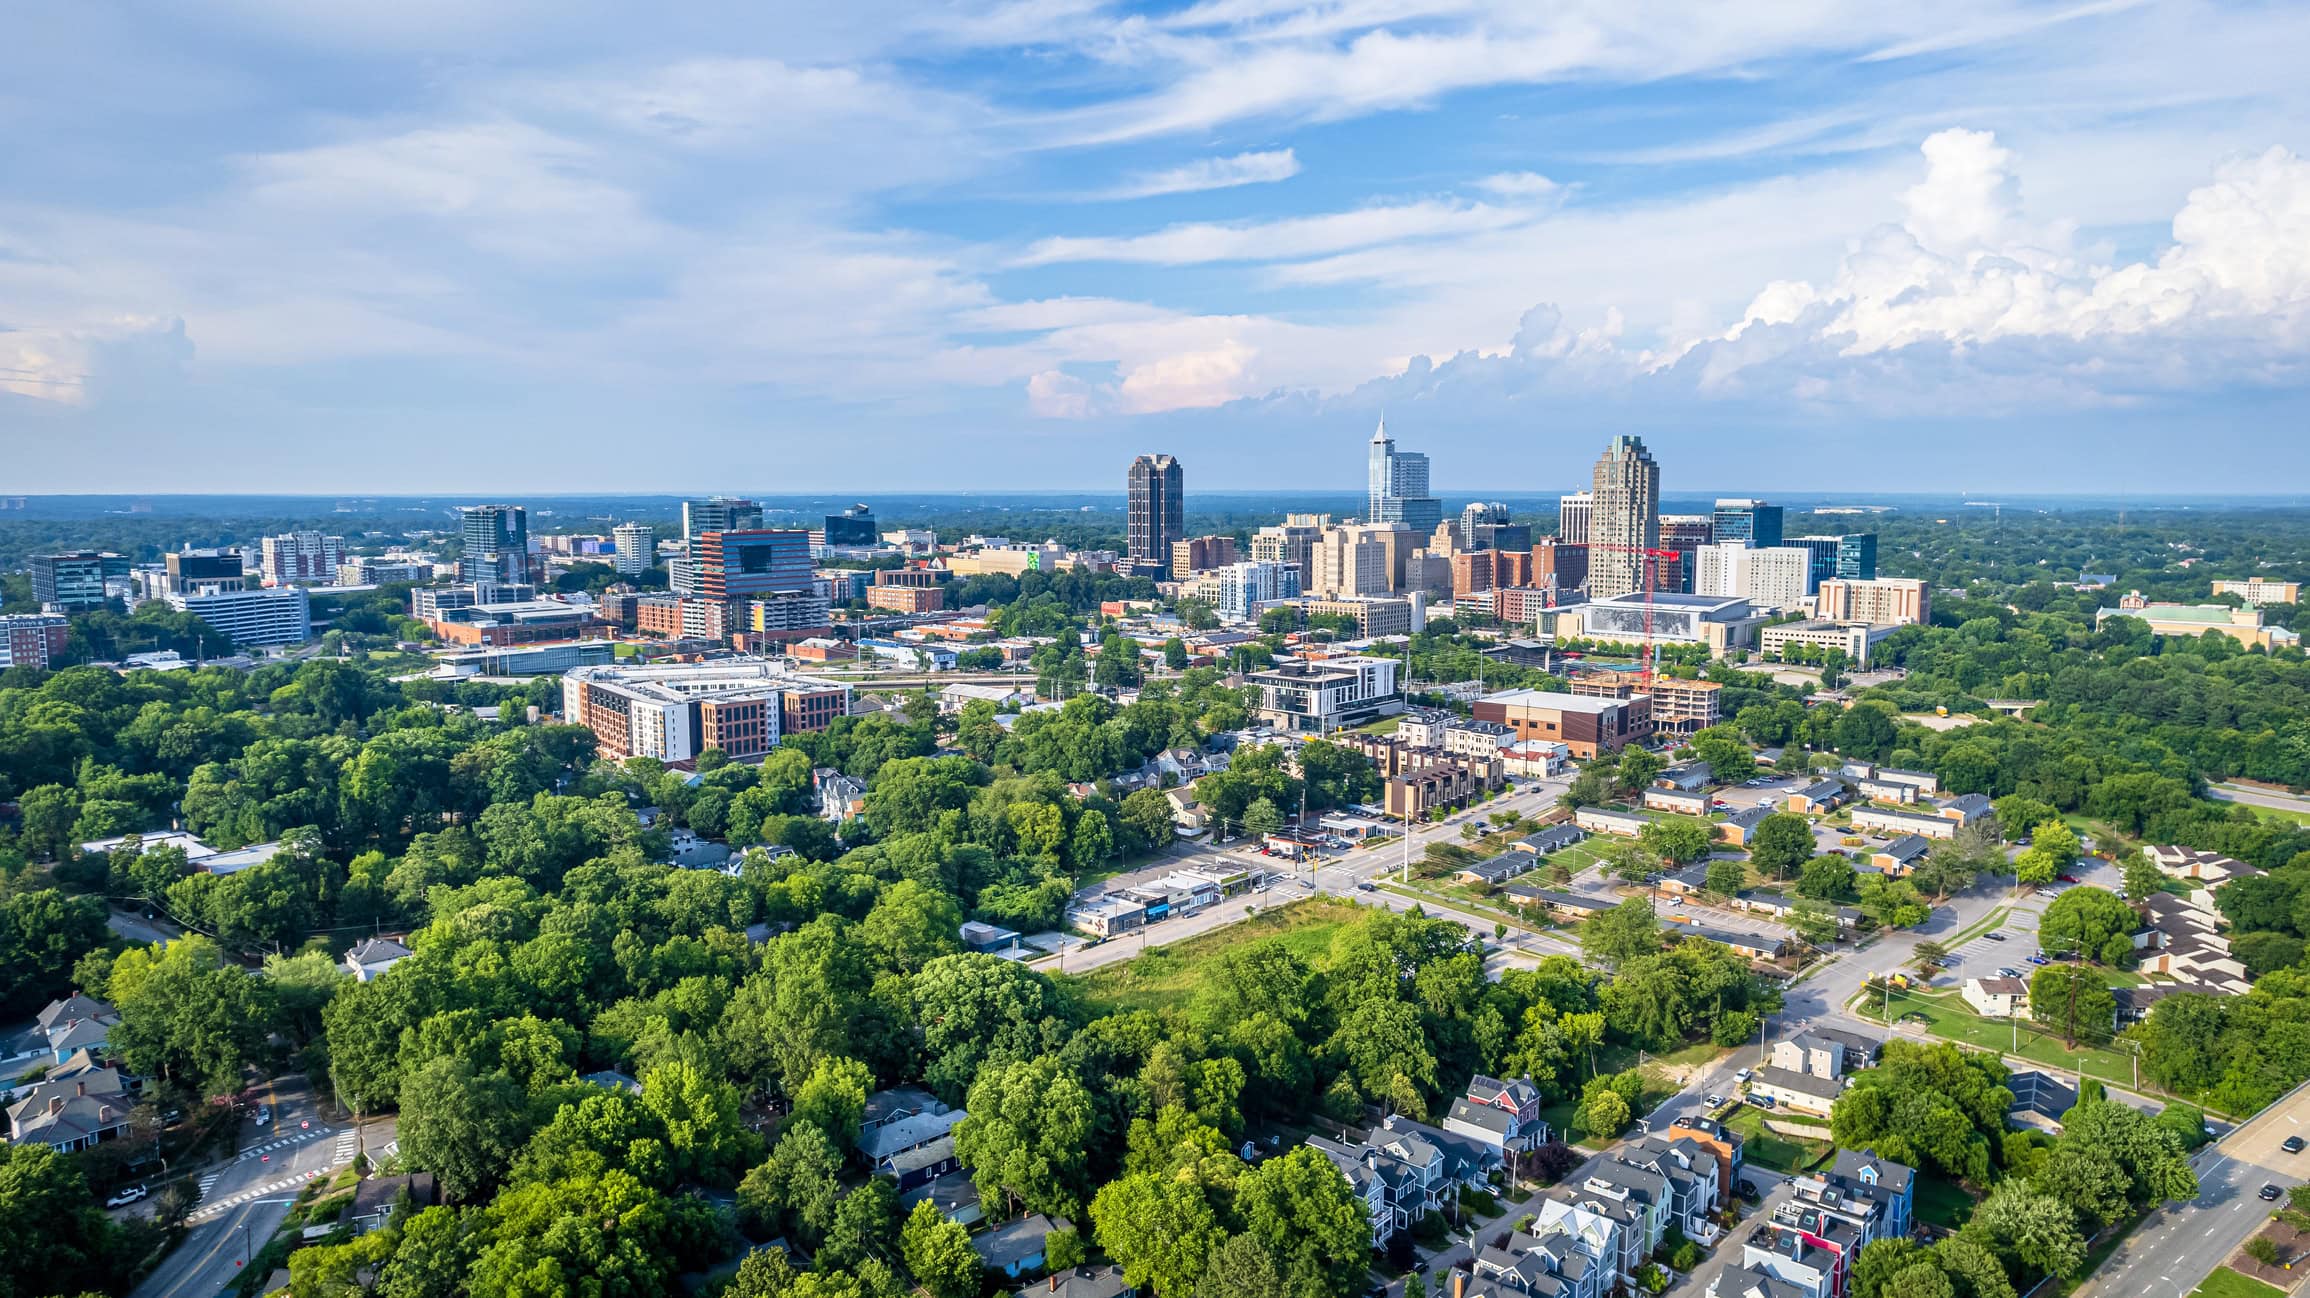 Top 20 Best Cities to Live in the USA - Raleigh, North Carolina